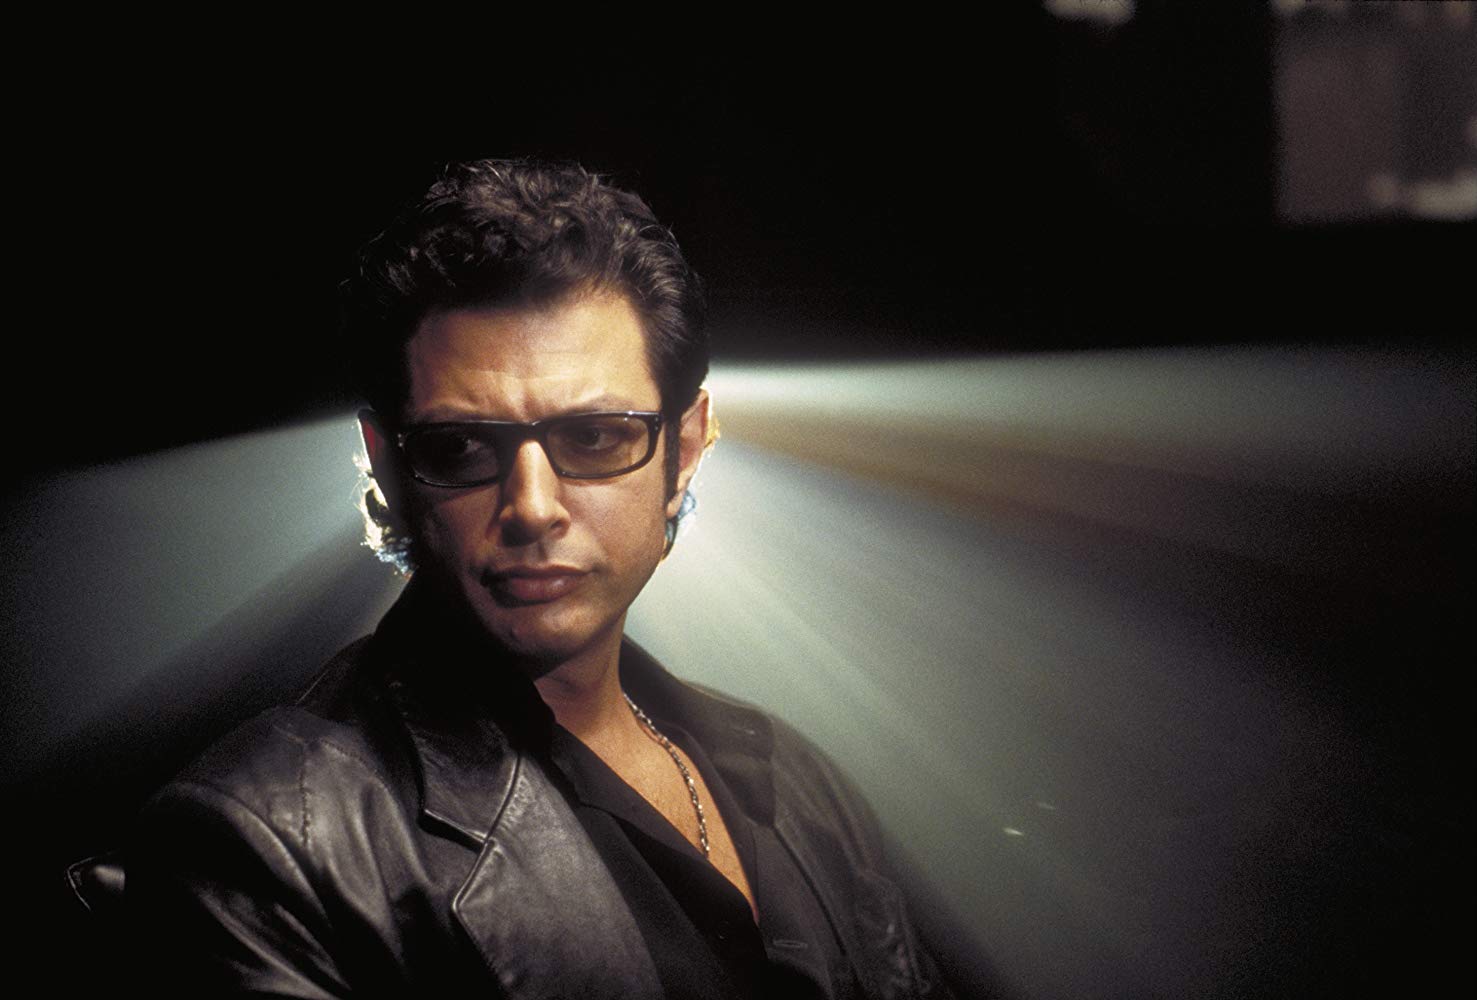 Jeff Goldblum looking serious in a leather jacket and sunglasses, silhouetted from behind.